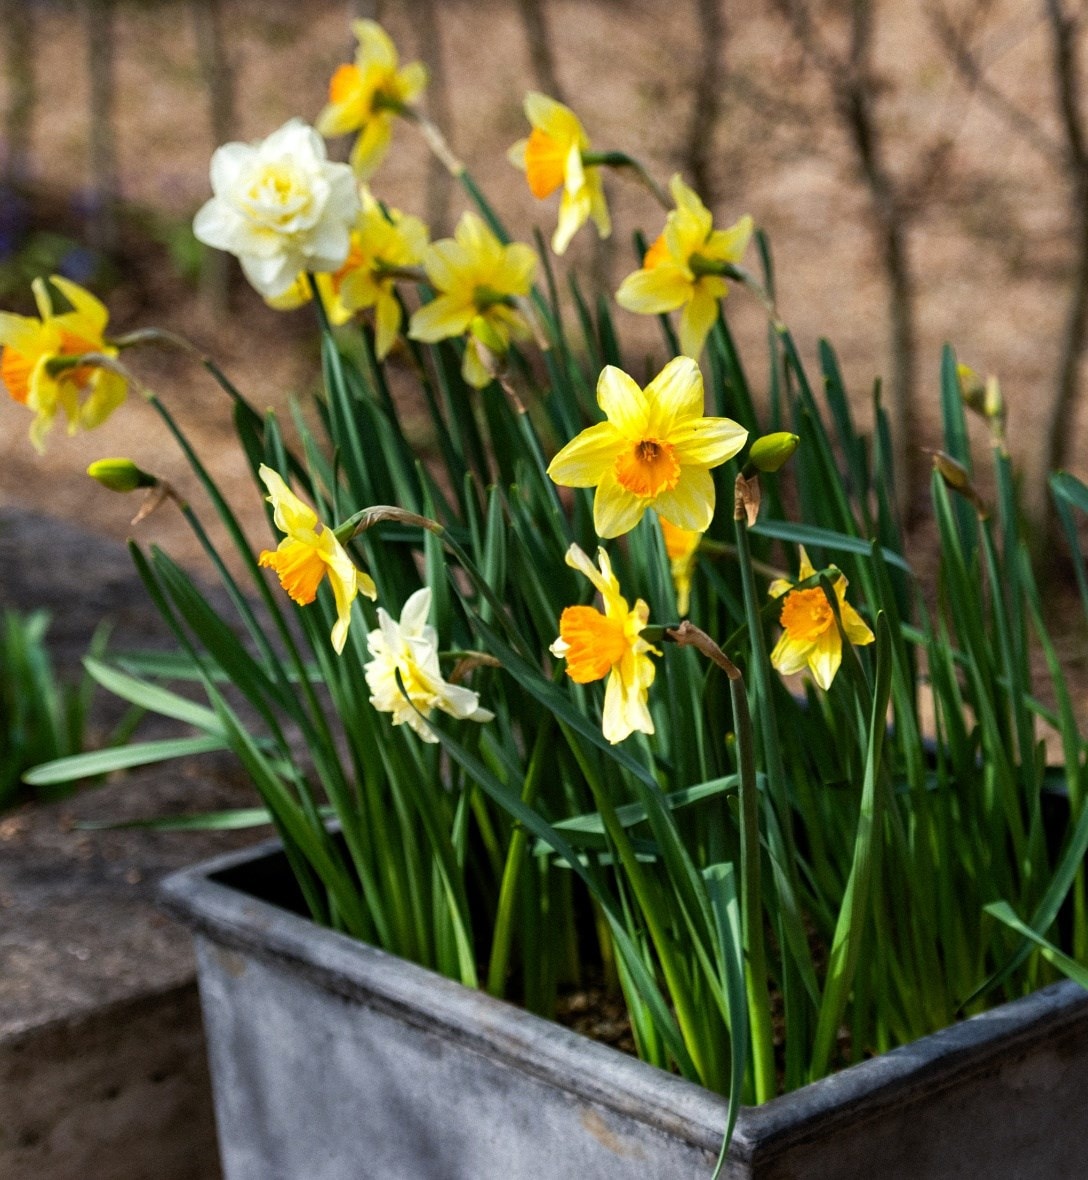 Daffodil collections